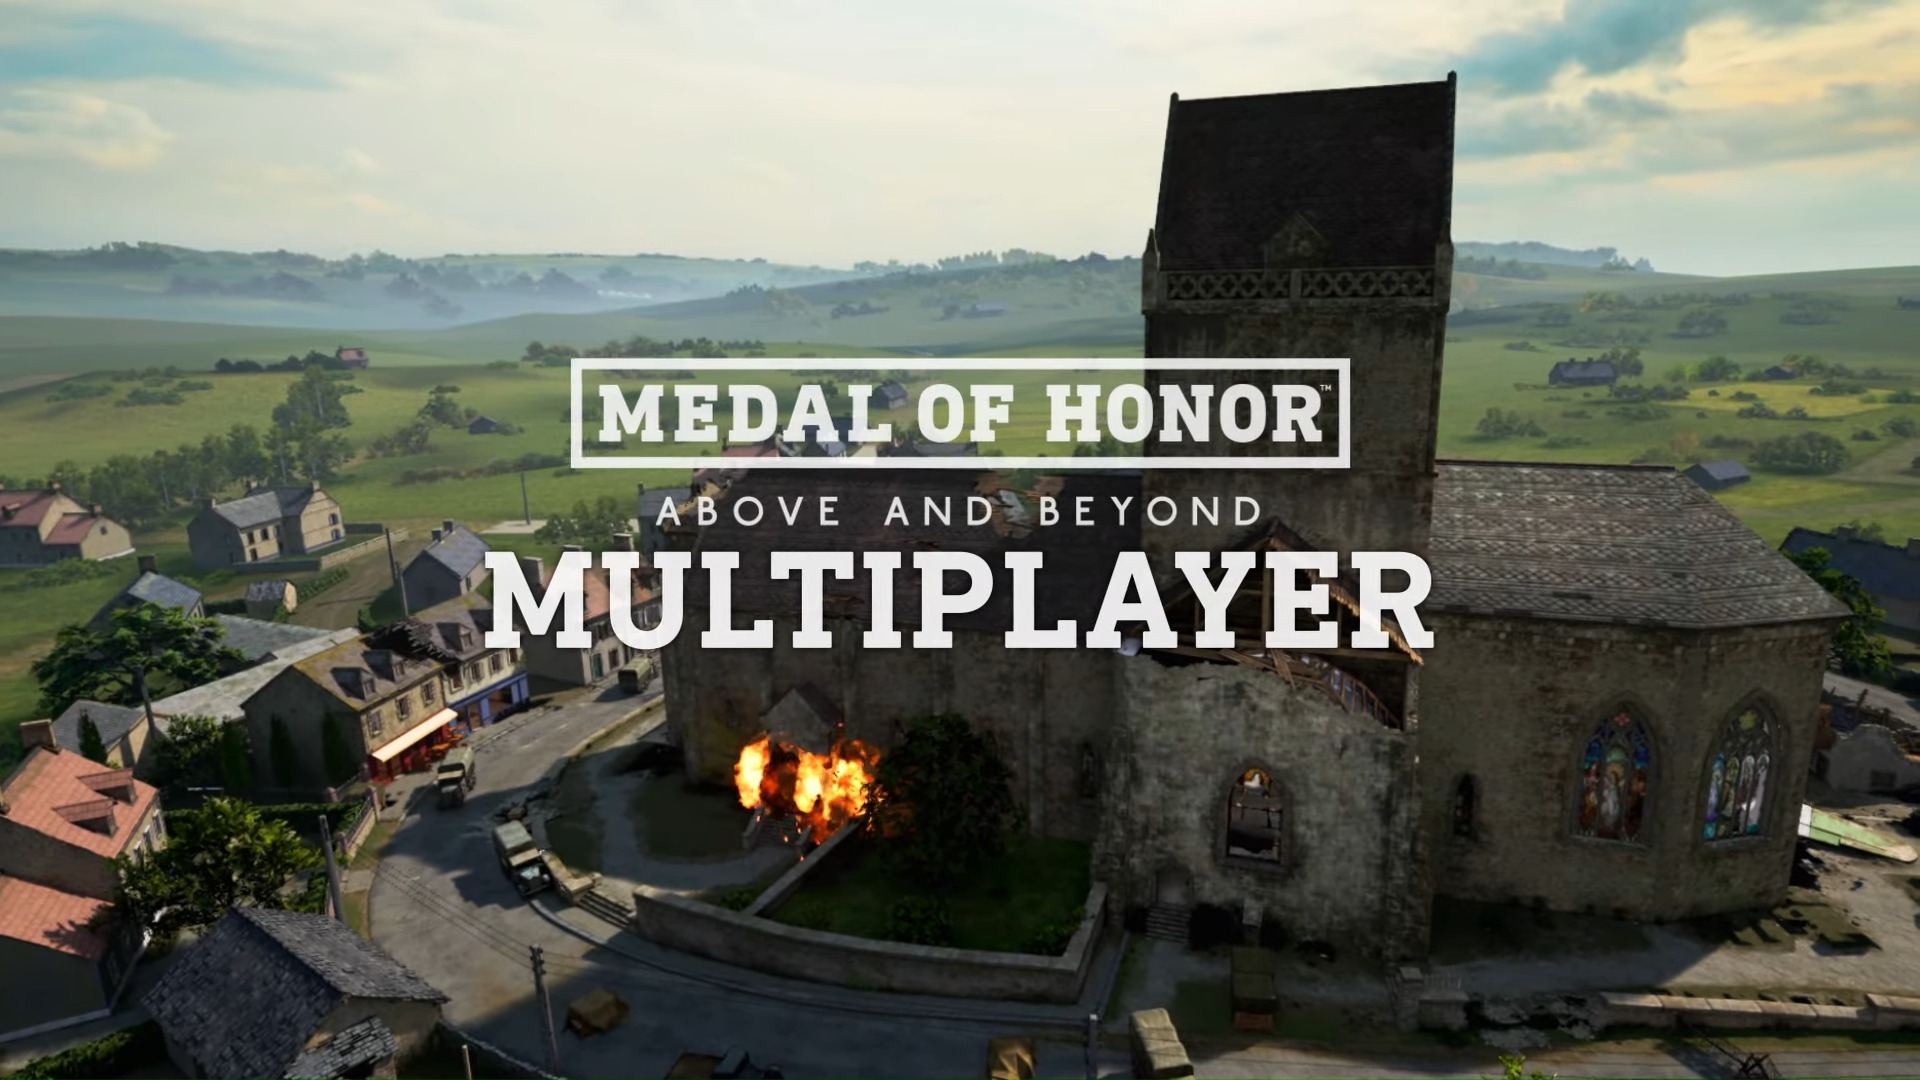 Medal of Honor: Above And Beyond VR Multiplayer Trailer Looks Incredible, A Big Step Up For VR Shooters